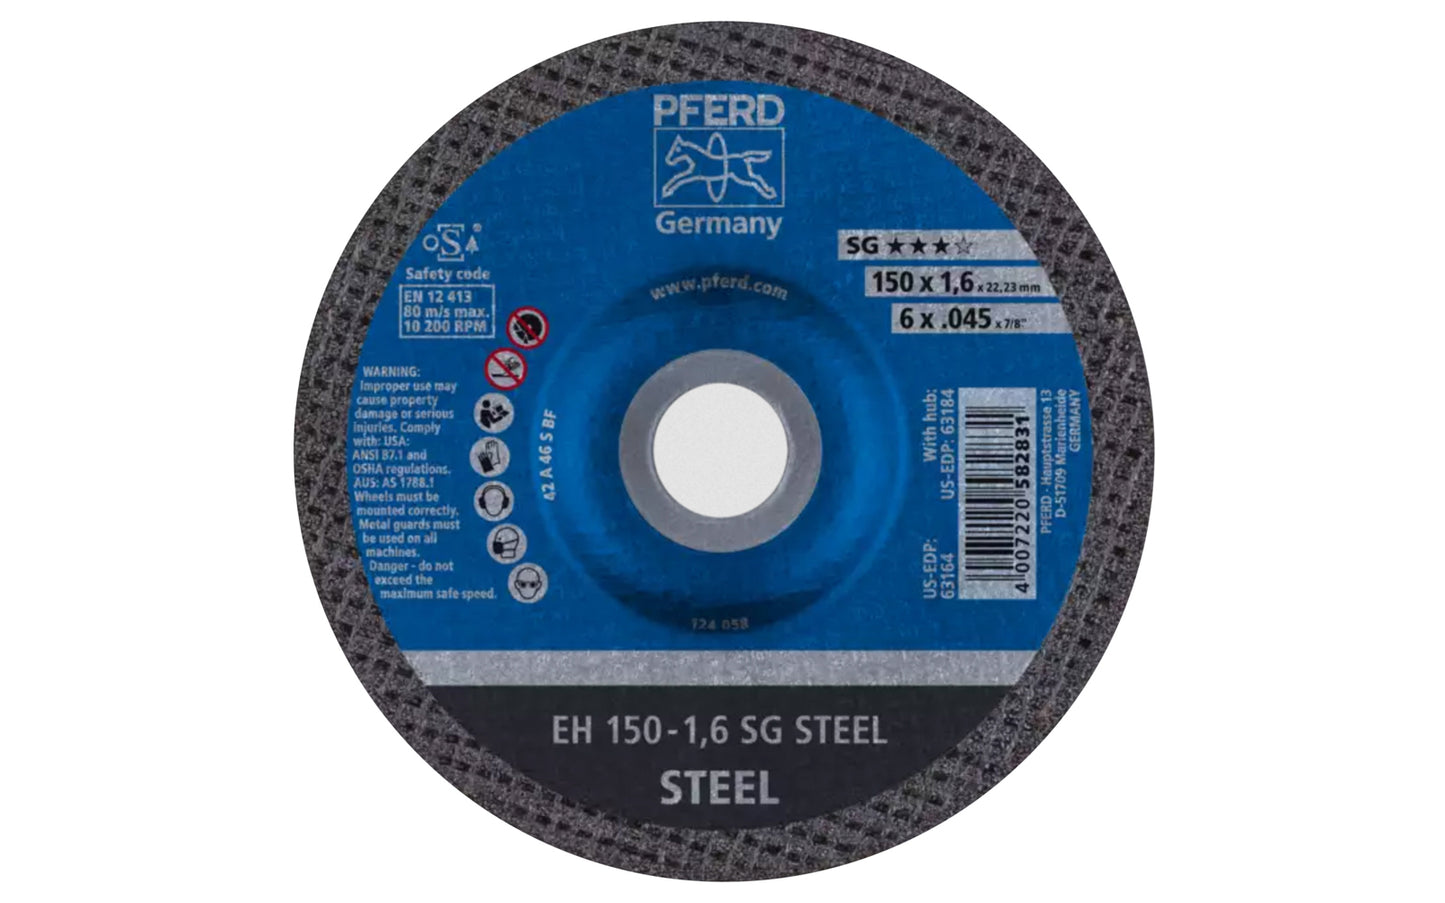 High quality 6" Cut-Off Wheel made by Pferd in Germany. Model 63164. Designed for steel (sheet metal, tool steel, HSS, structural steel, etc) & suitable for cast iron, & non-ferrous metals. Fast cutting. 6" diameter of wheel. 7/8" arbor hole. 0.045" thickness of blade. cut off disc. 4007220582831. Made in Germany.